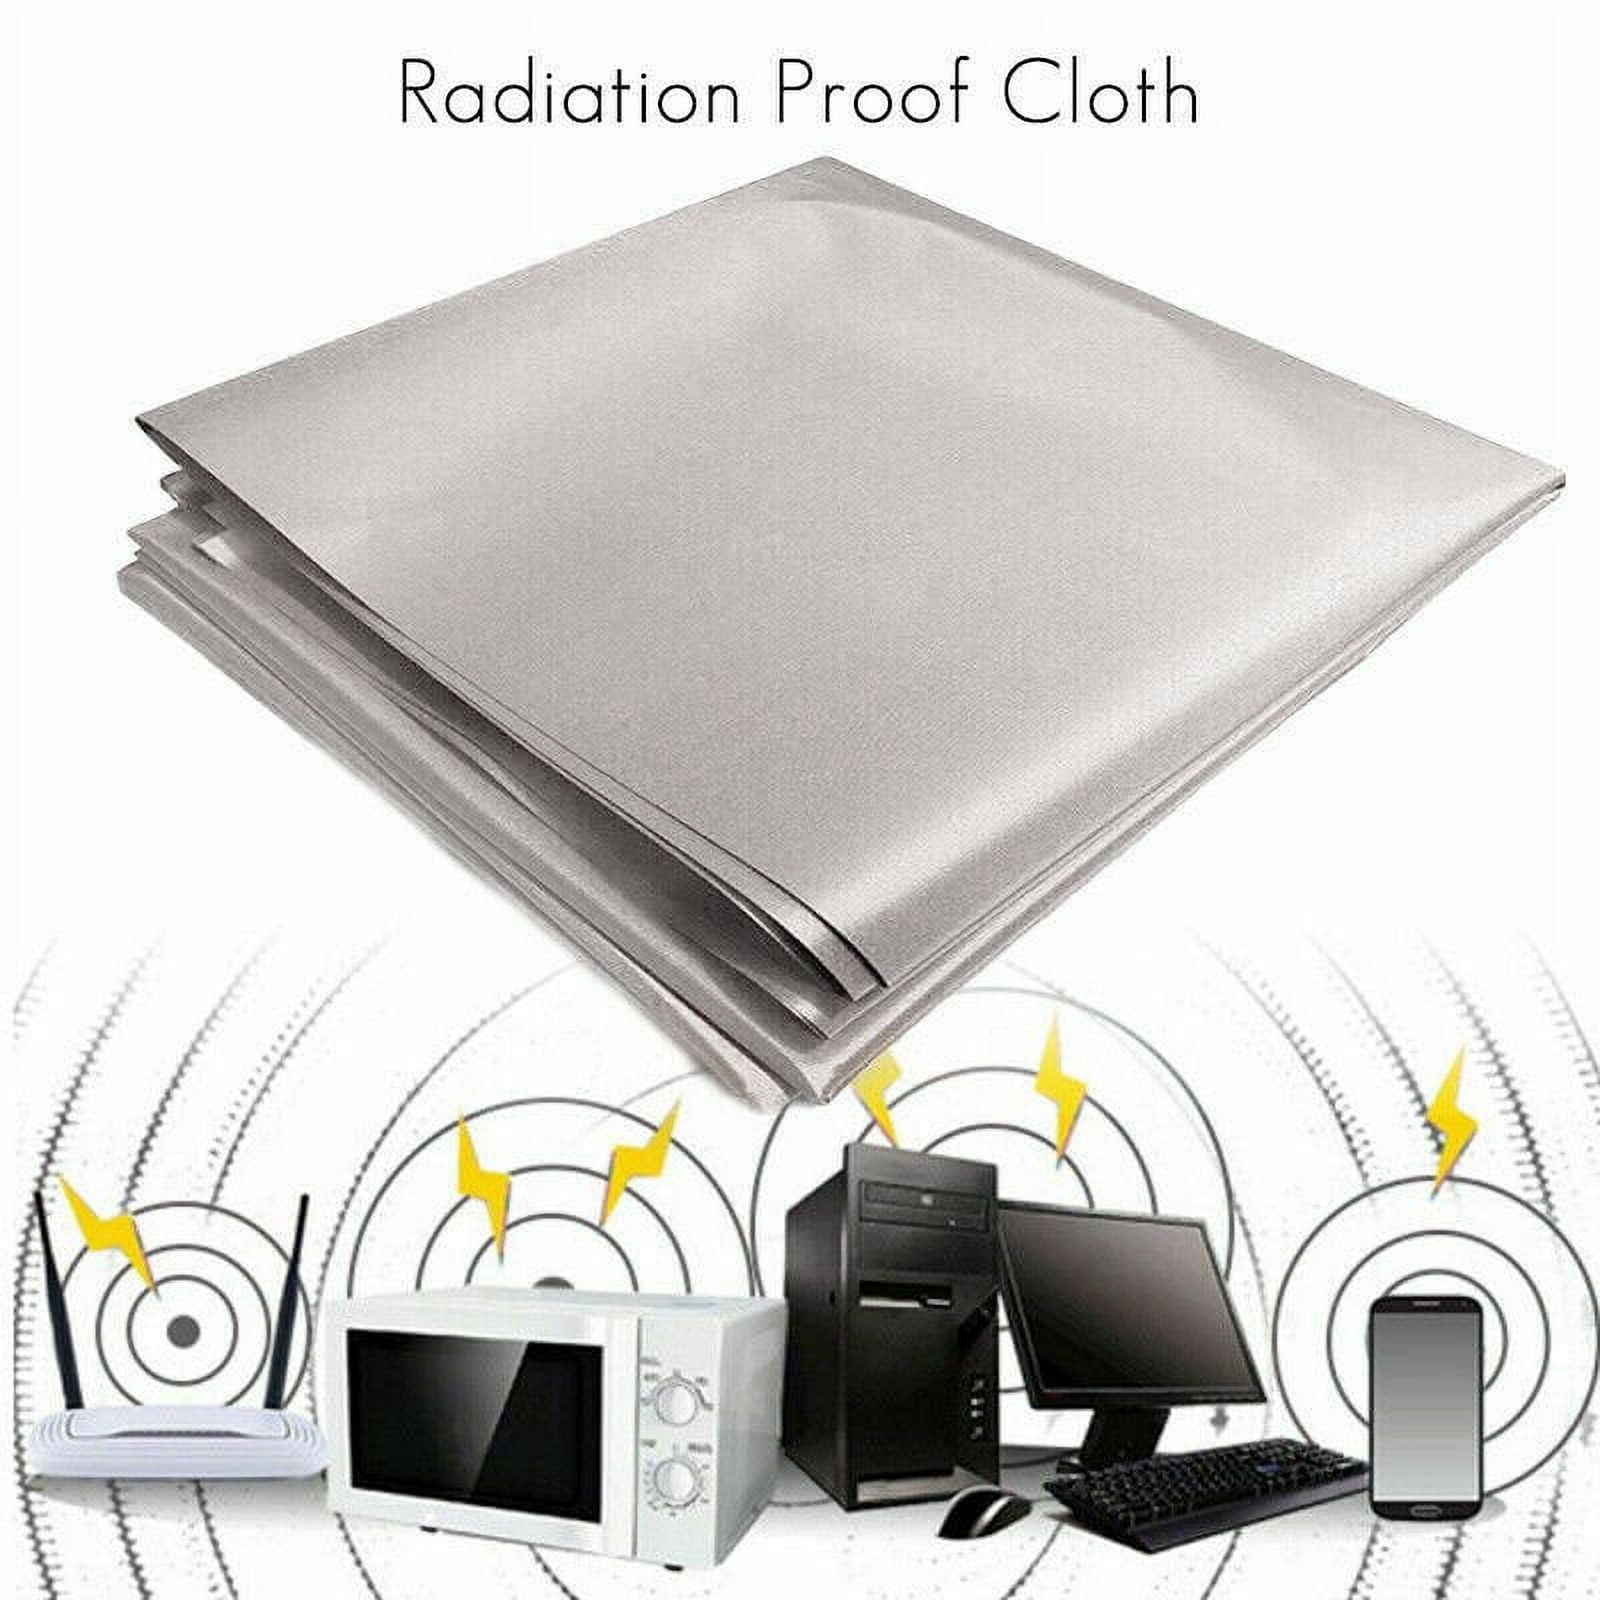 Smart Meter Radiation Shield Cover UK. Faraday Cage. Reduce Microwave  Radiation. 